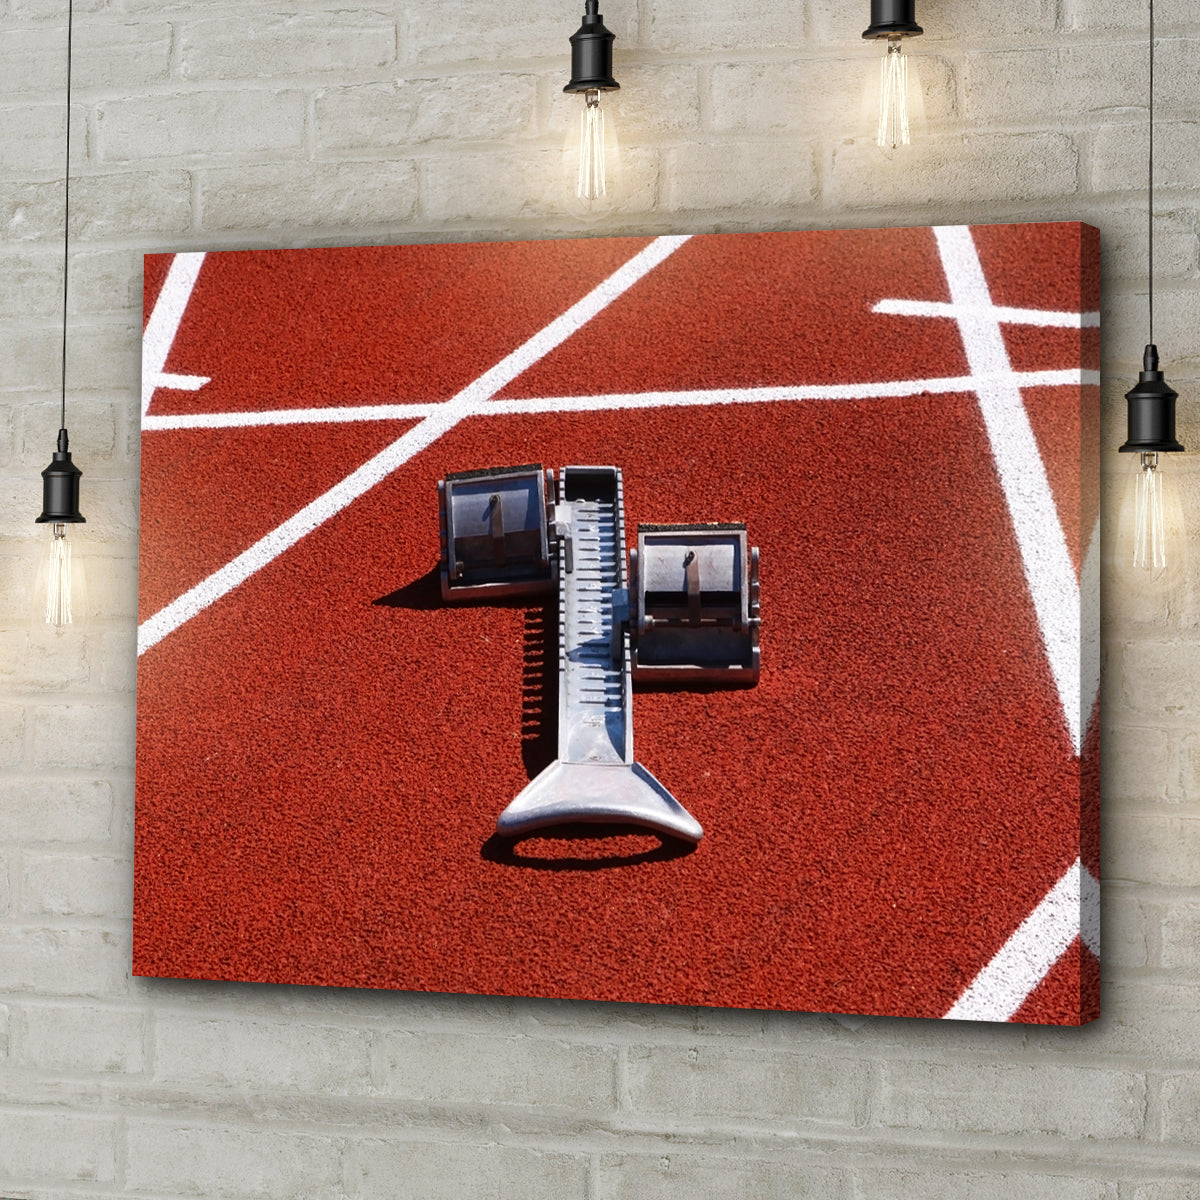 Track and Field Starting Block Devices Canvas Wall Art  - Image by Tailored Canvases